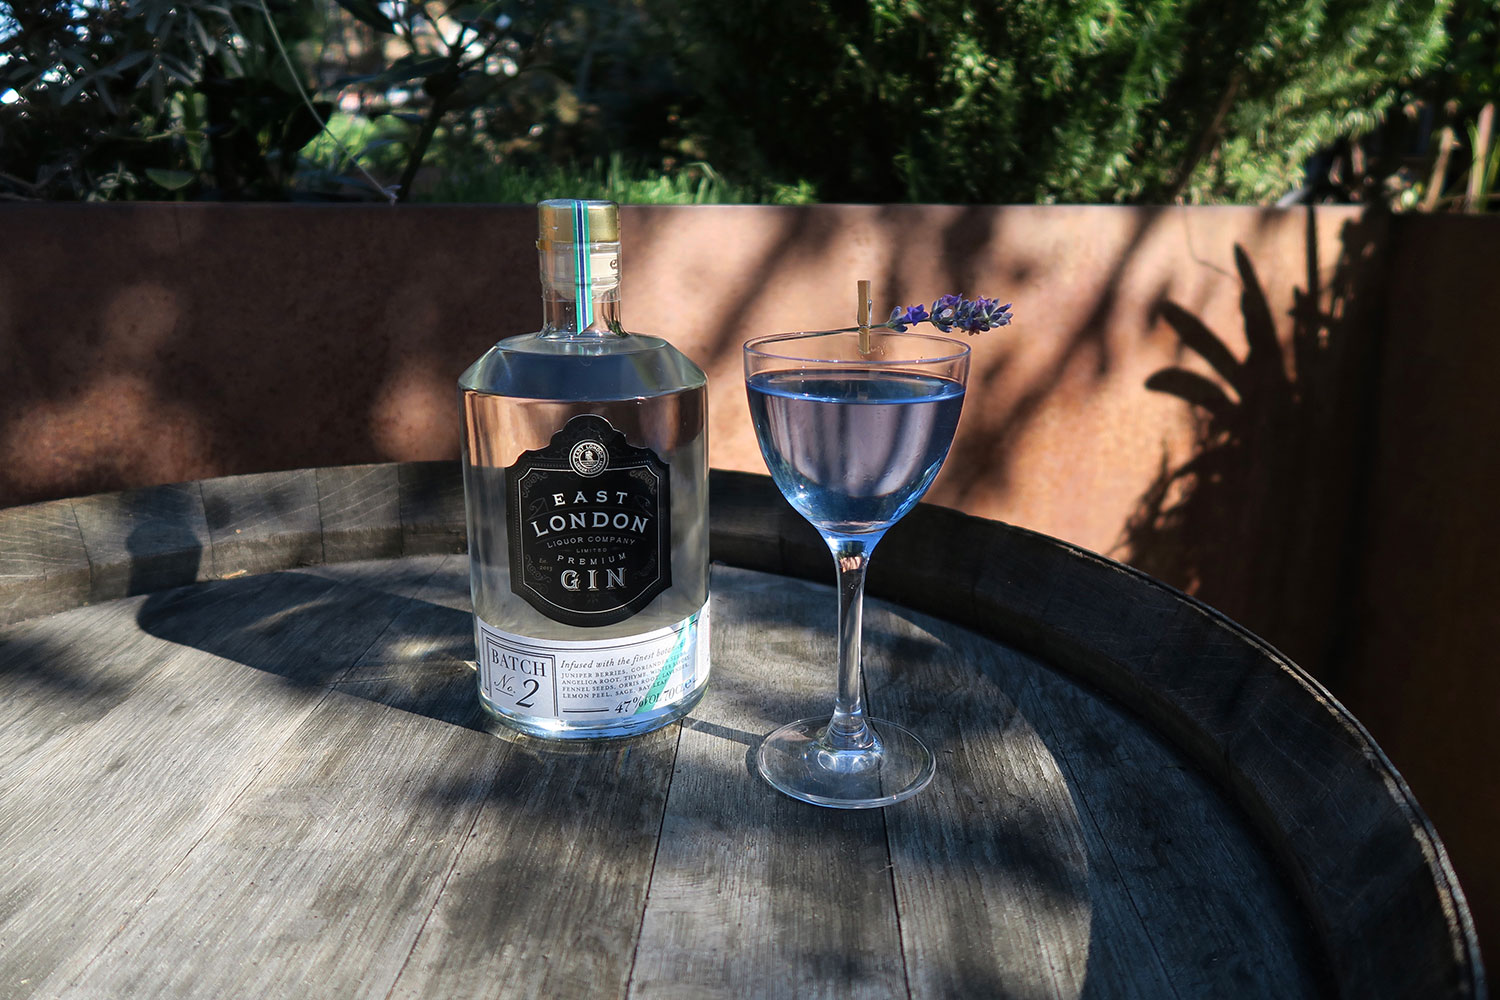 Bottle of gin on garden table next to cocktail in blue glass